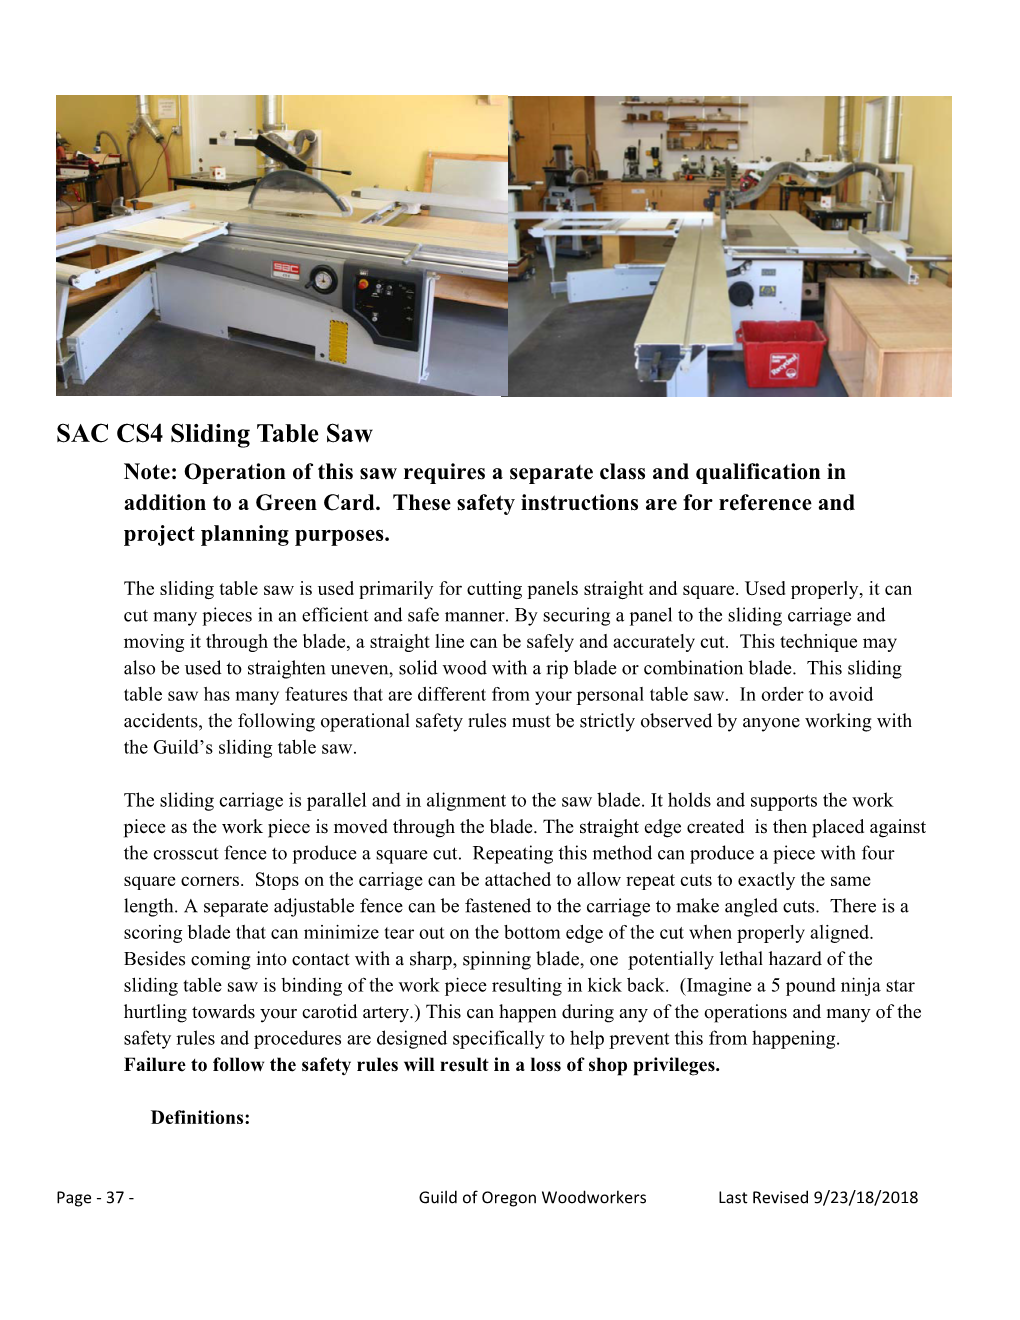 SAC CS4 Sliding Table Saw Note: Operation of This Saw Requires a Separate Class and Qualification in Addition to a Green Card